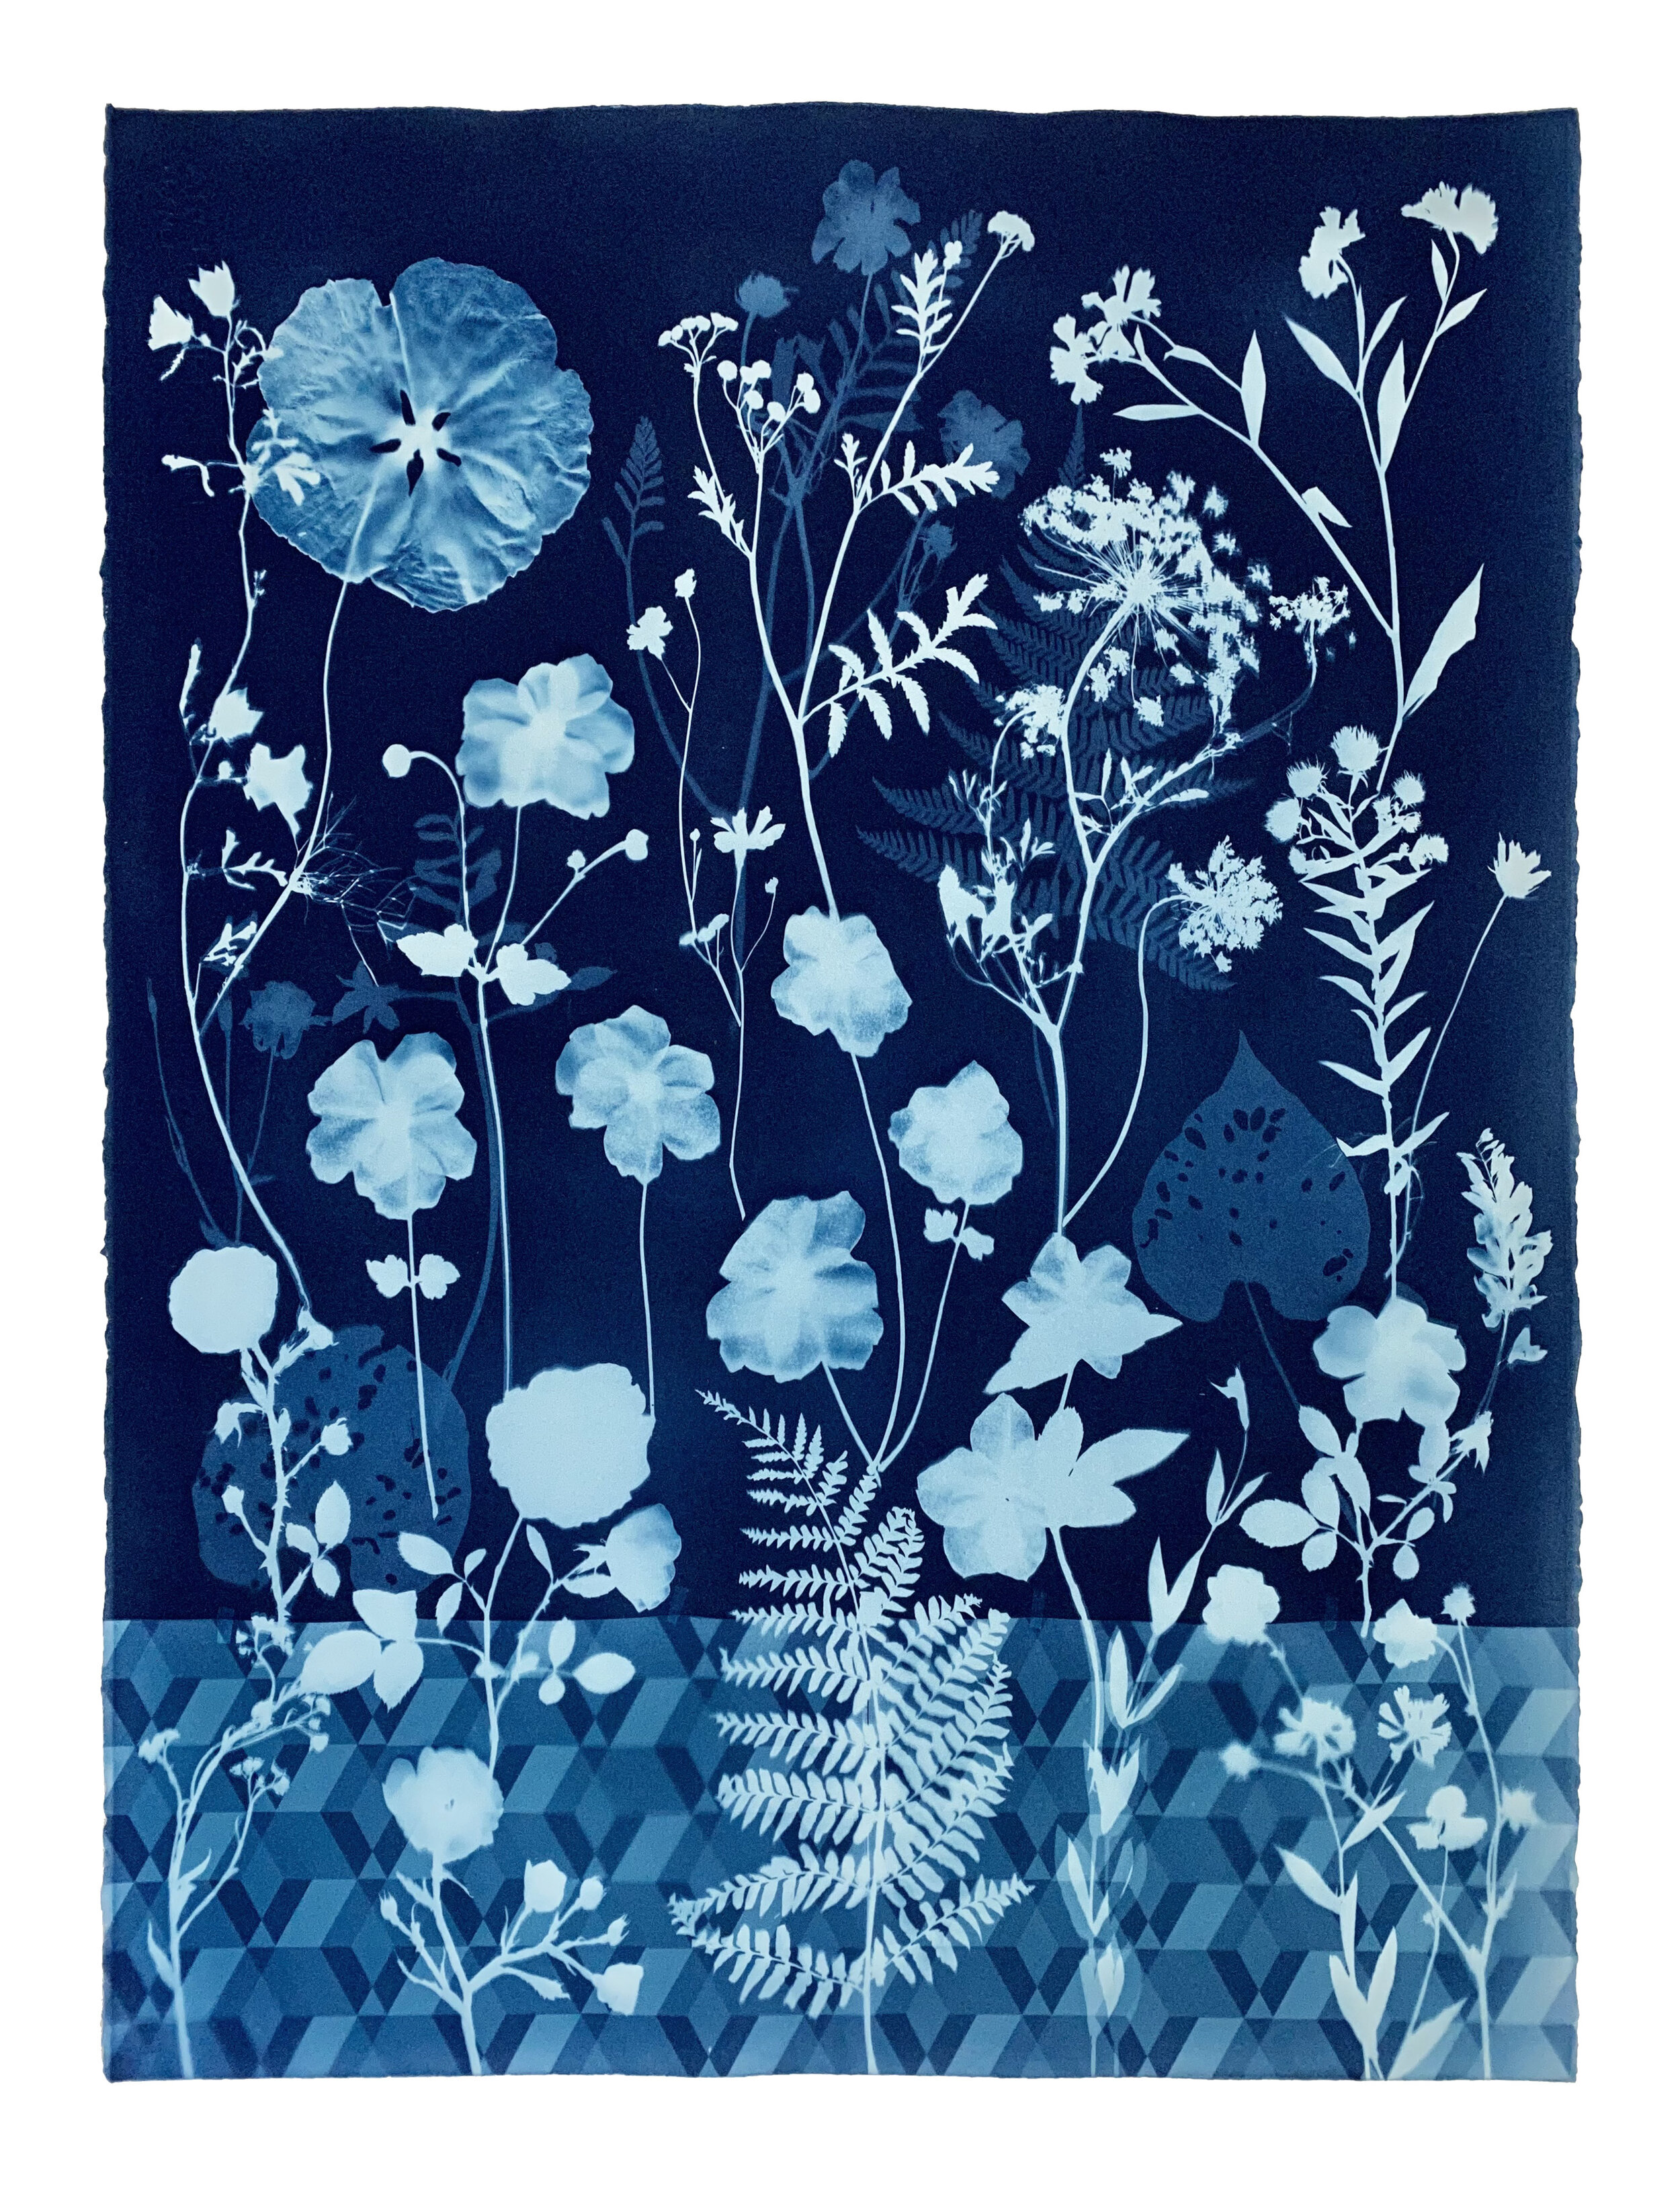 Cyanotype Painting (Anemones, Rose of Sharon, Queen Anne's Lace, Floor Pattern)